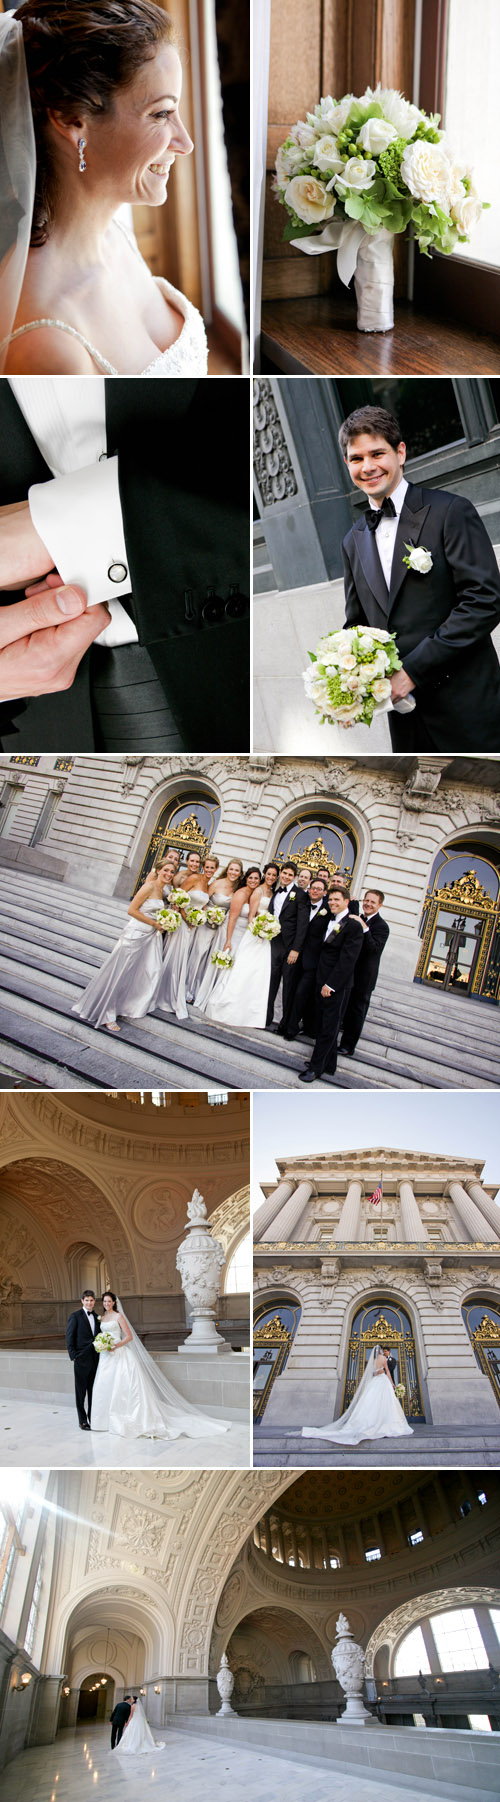 classic and elegant black tie wedding at San Francisco City Hall, ivory, silver, peach and sage green Art Deco wedding decor, photos by Michelle Walker Photography